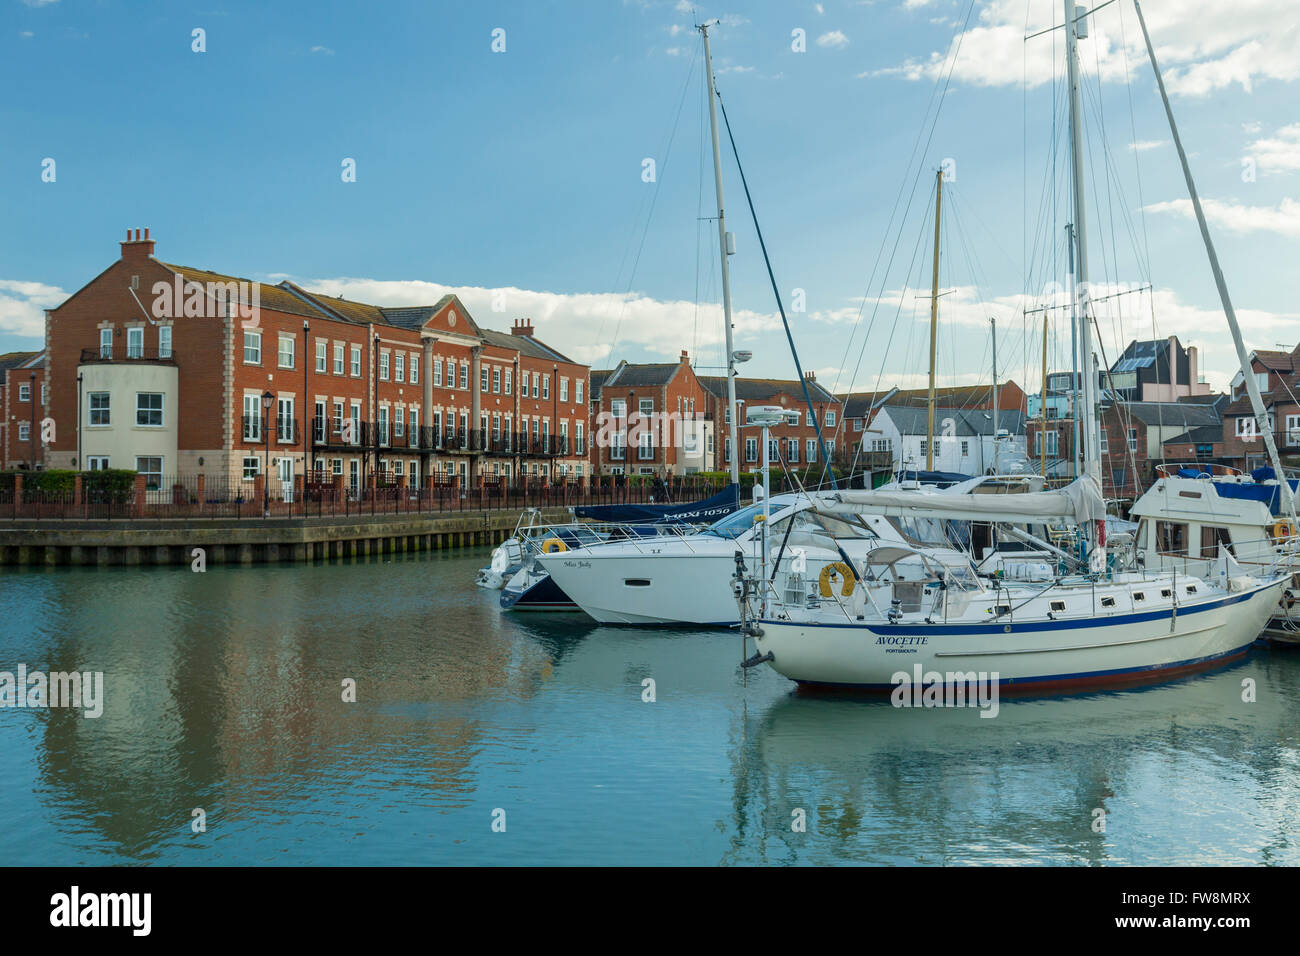 Afternoon at Portsmouth Harbour, Hampshire, England. Stock Photo